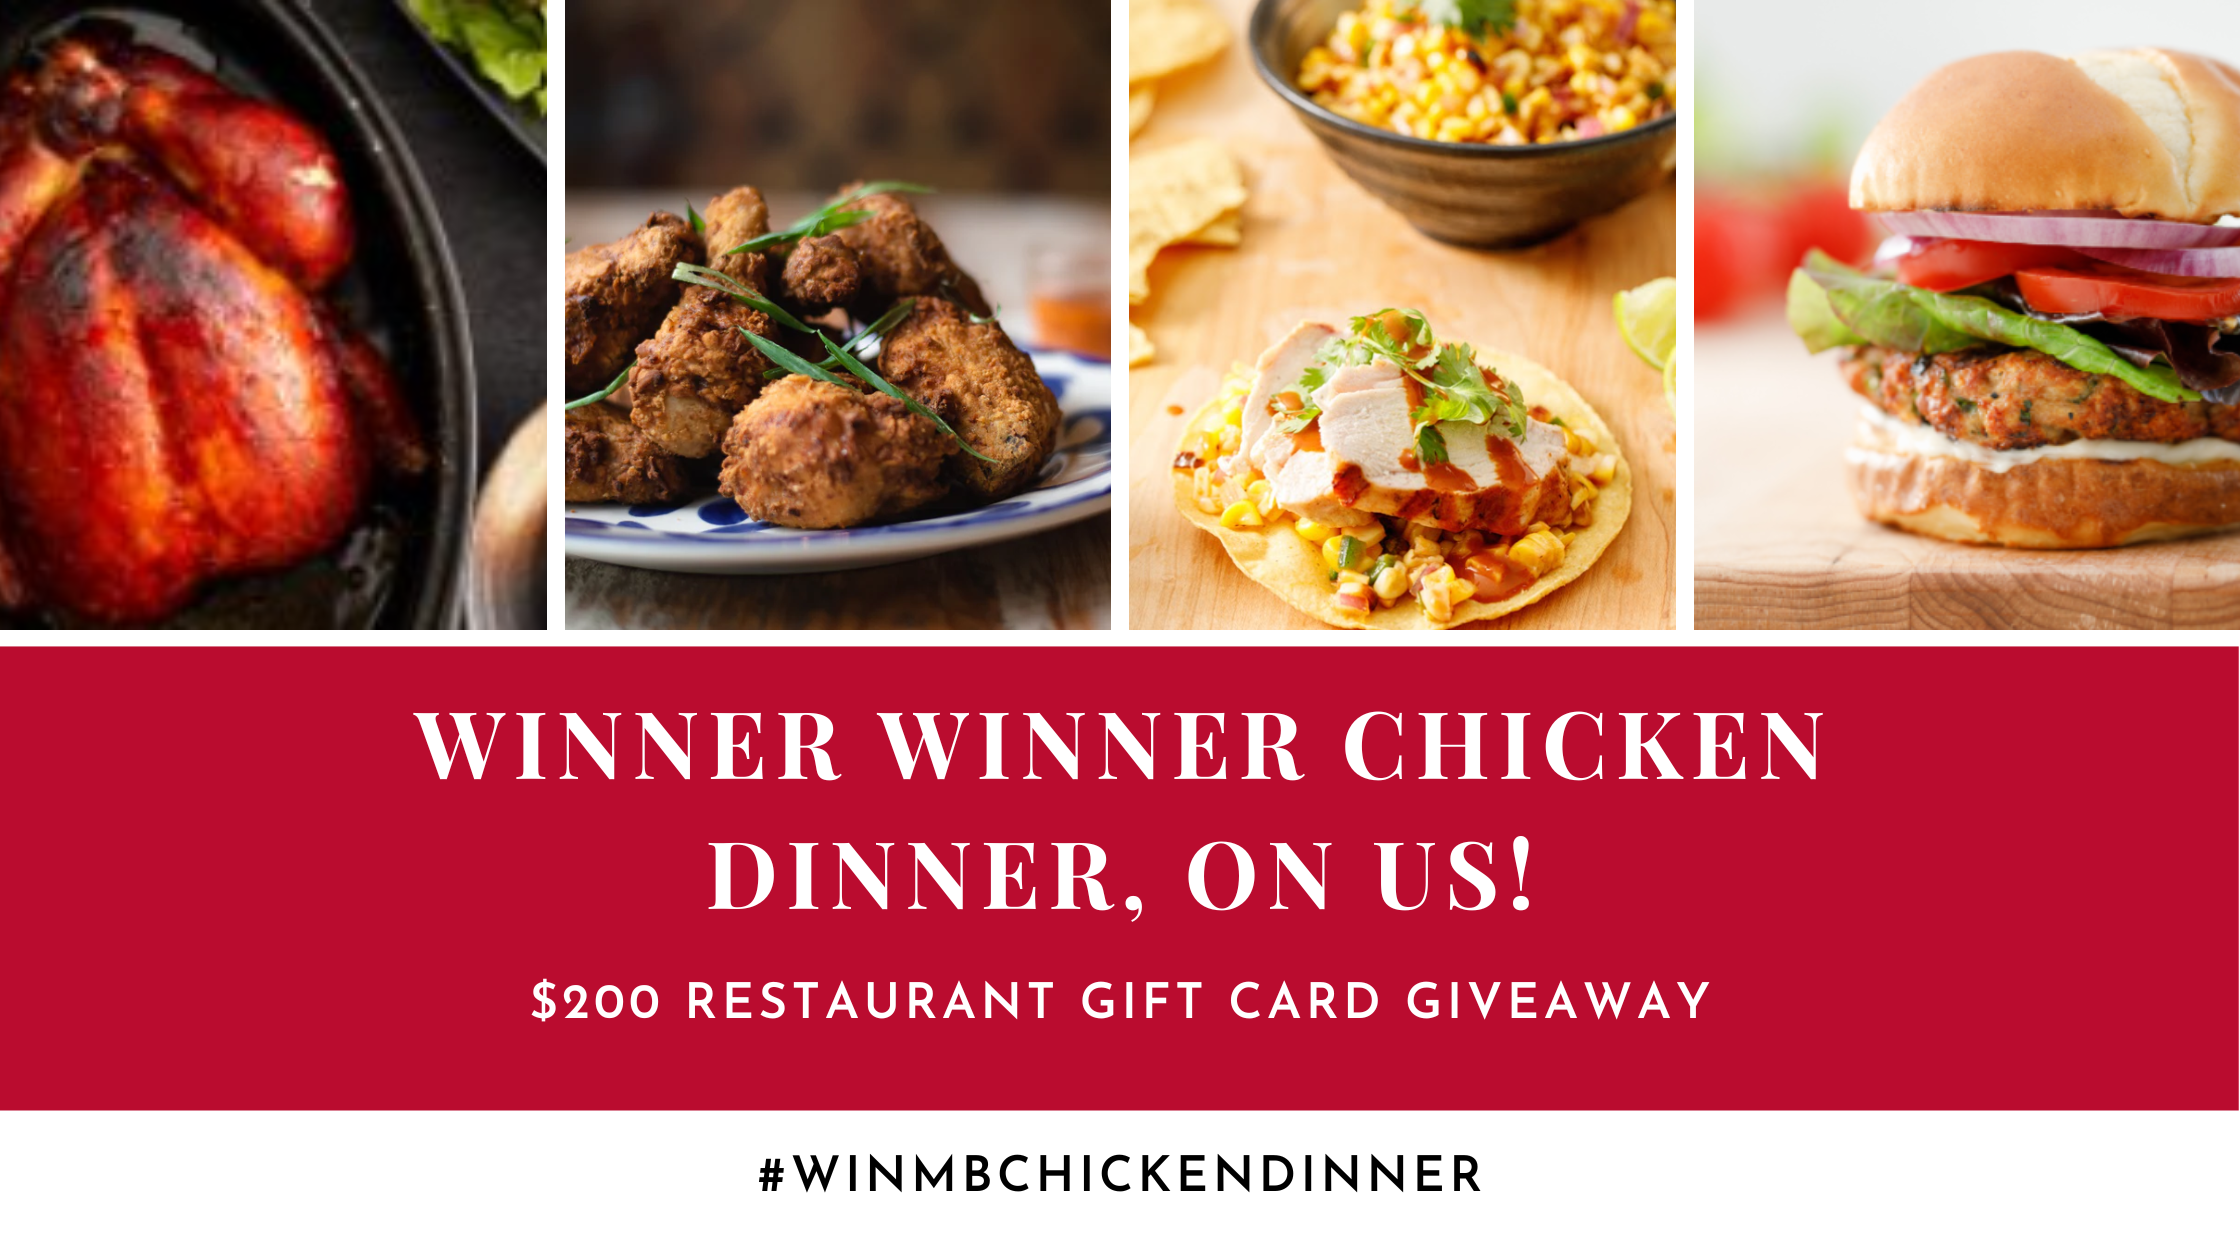 Restaurant Gift Card Giveaway